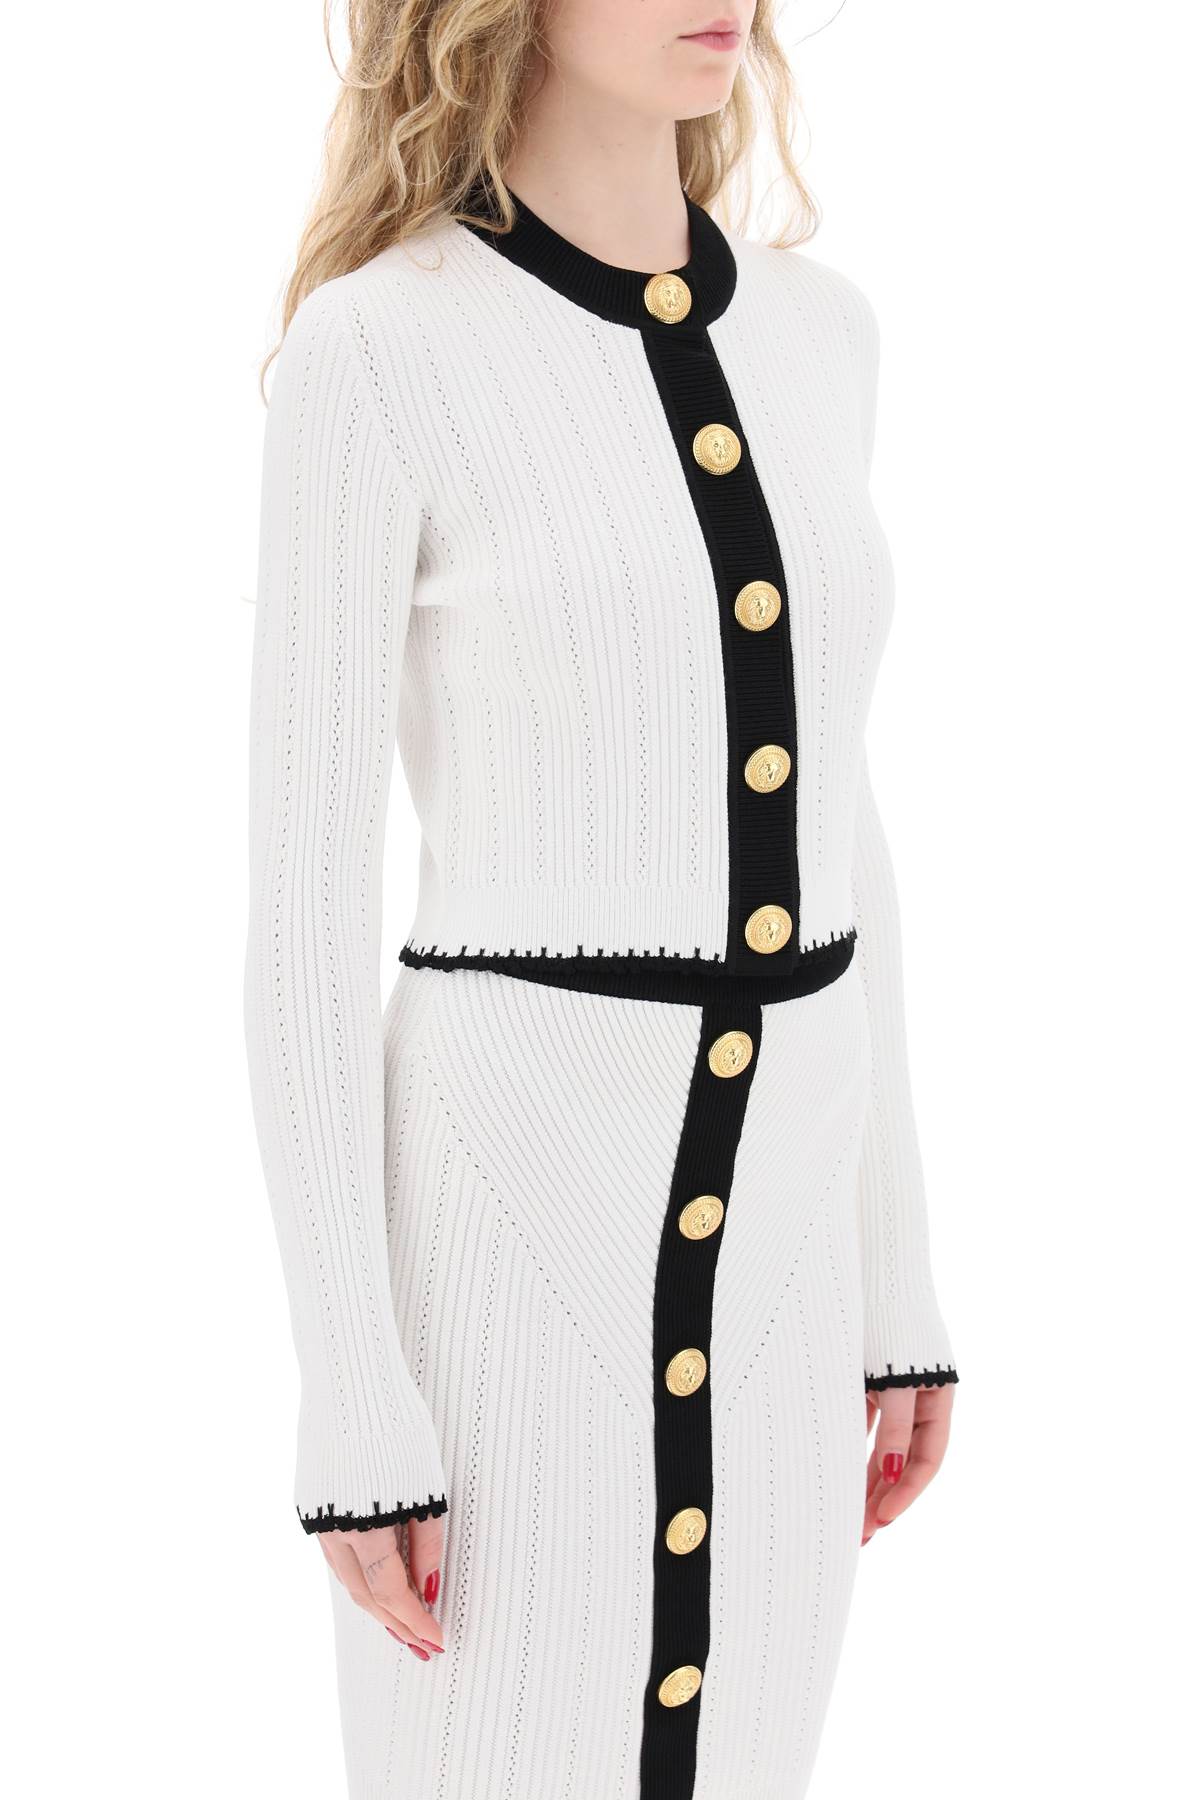 Balmain Bicolor Knit Cardigan With Embossed Buttons In Multi